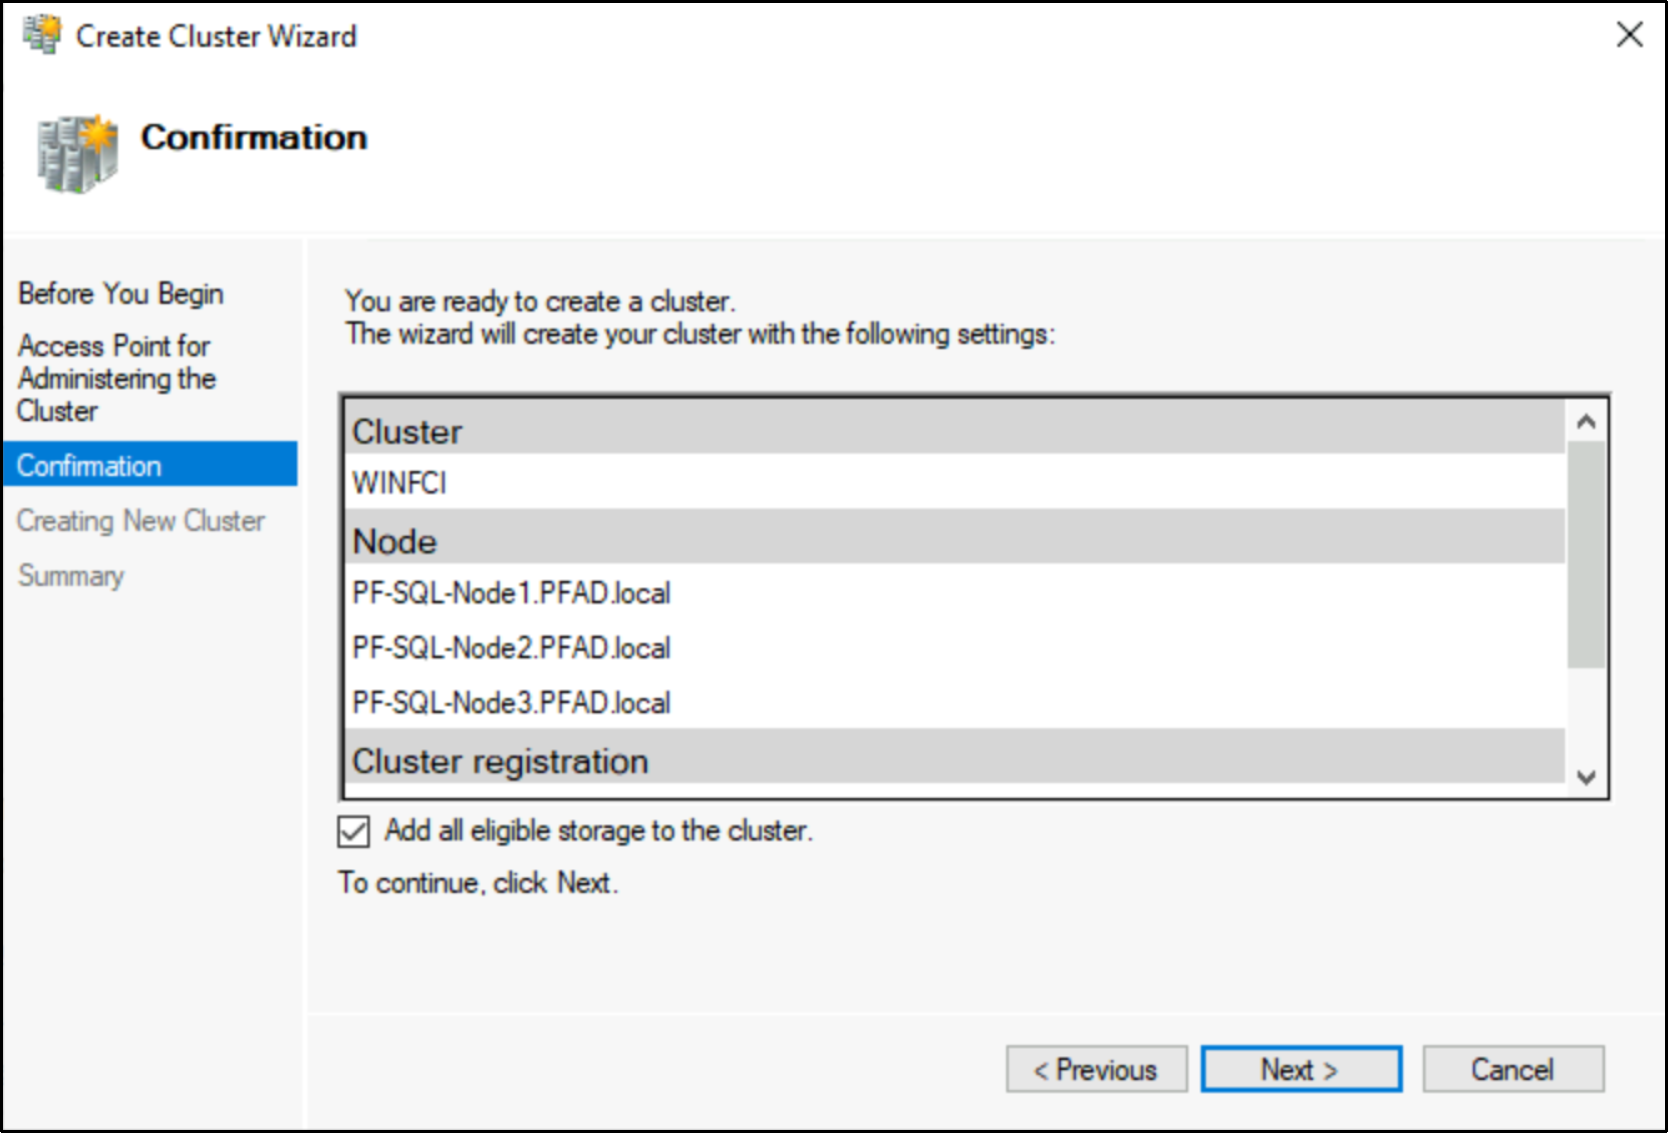 This figure shows the confirmation dialog box to create a cluster.